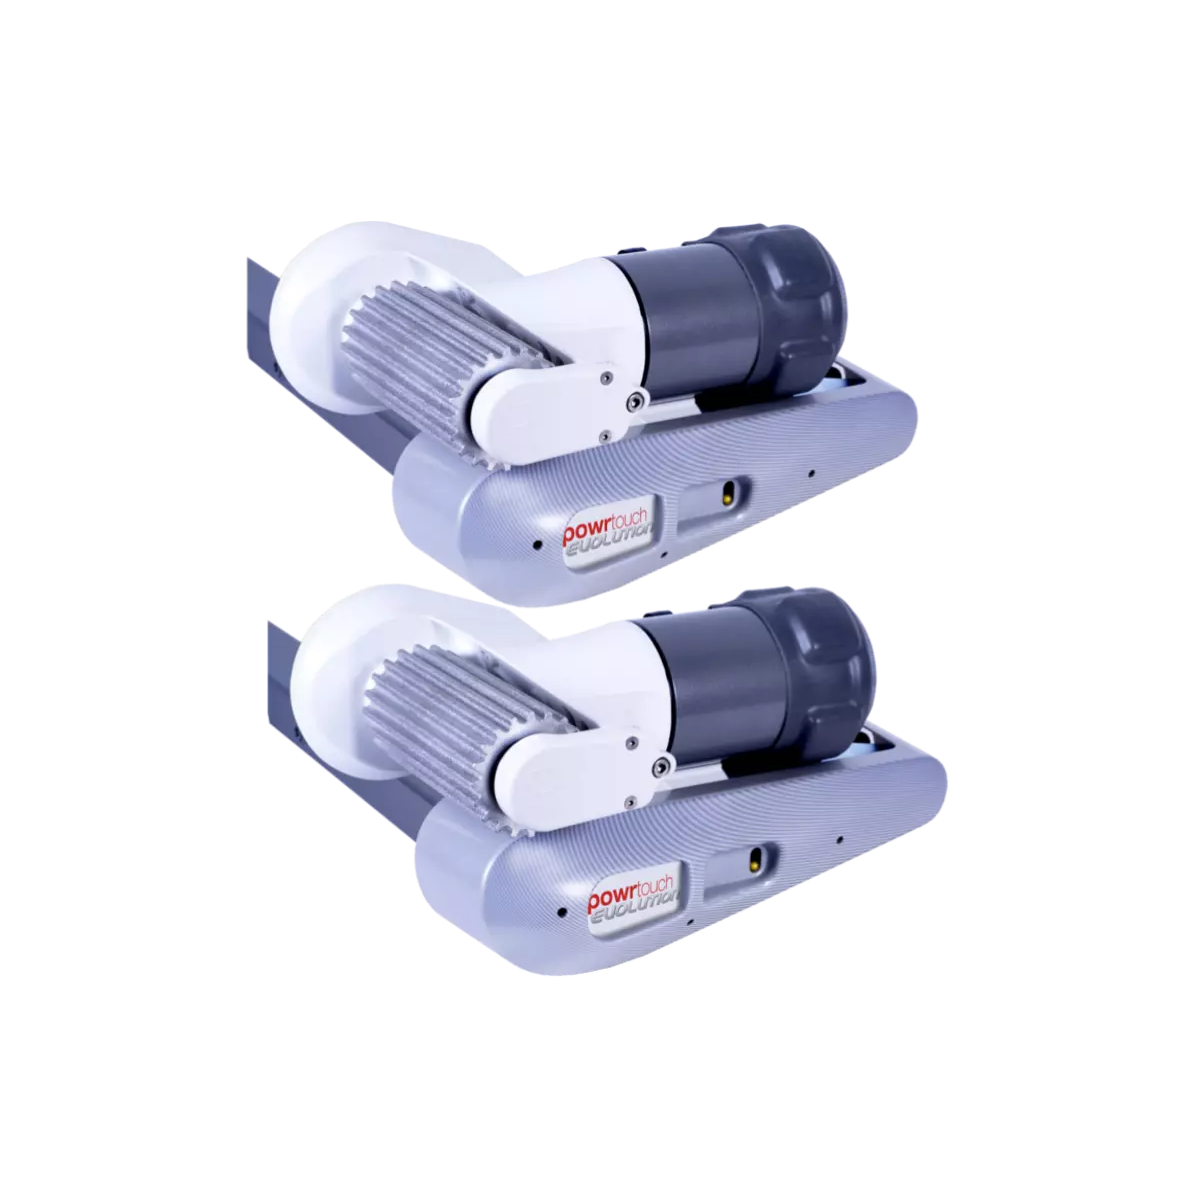 Dual Powrtouch Evolution motor movers